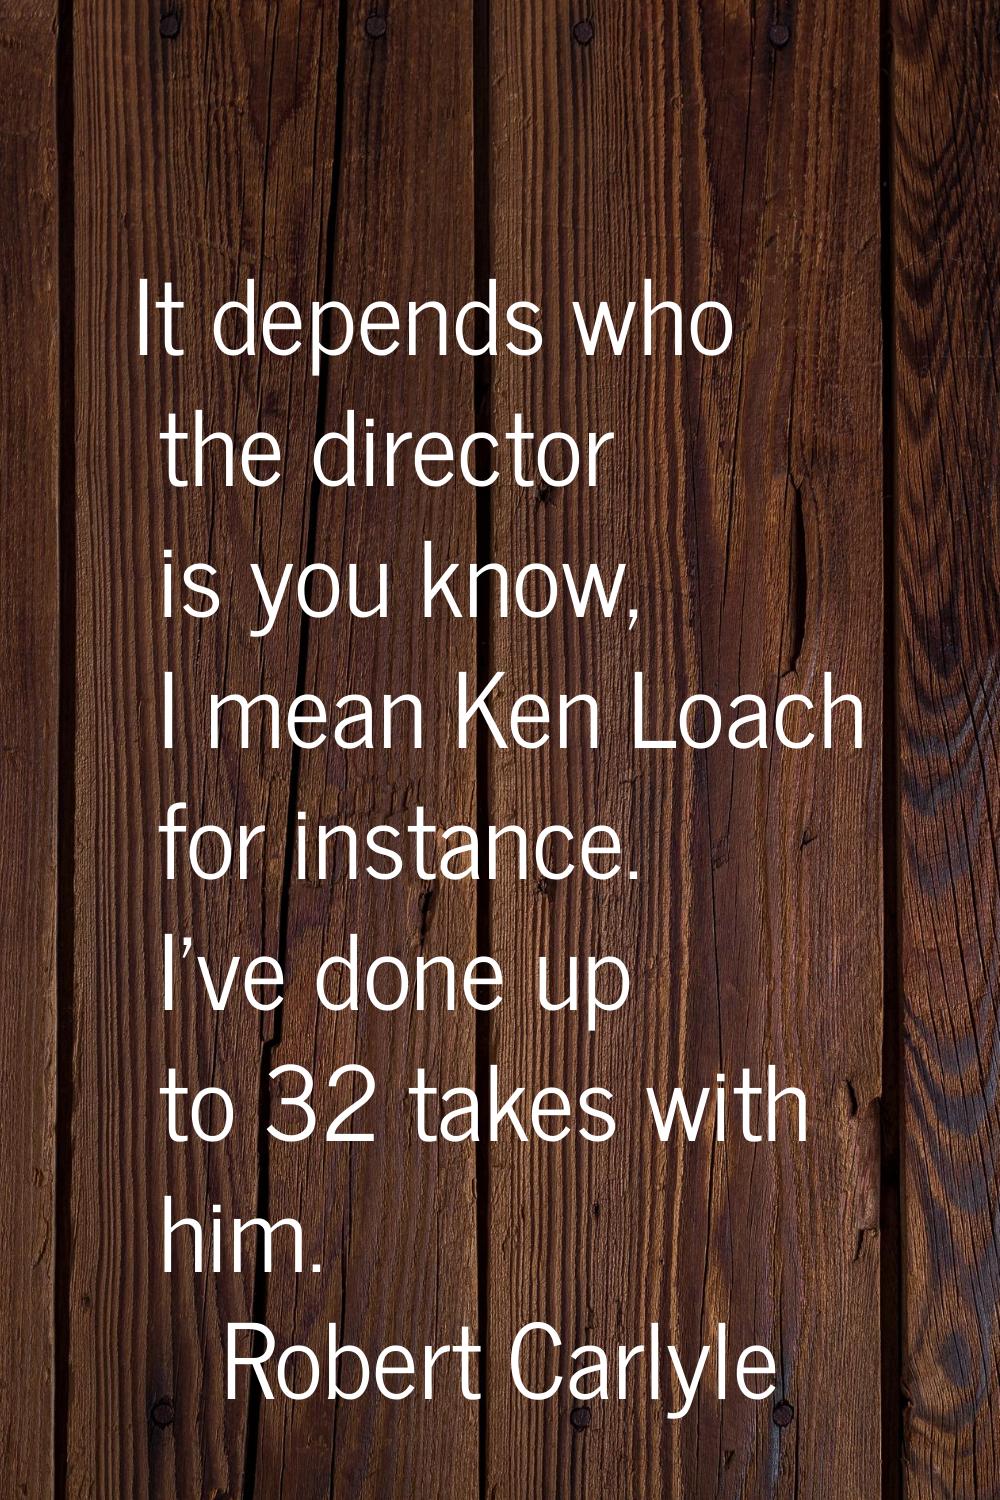 It depends who the director is you know, I mean Ken Loach for instance. I've done up to 32 takes wi